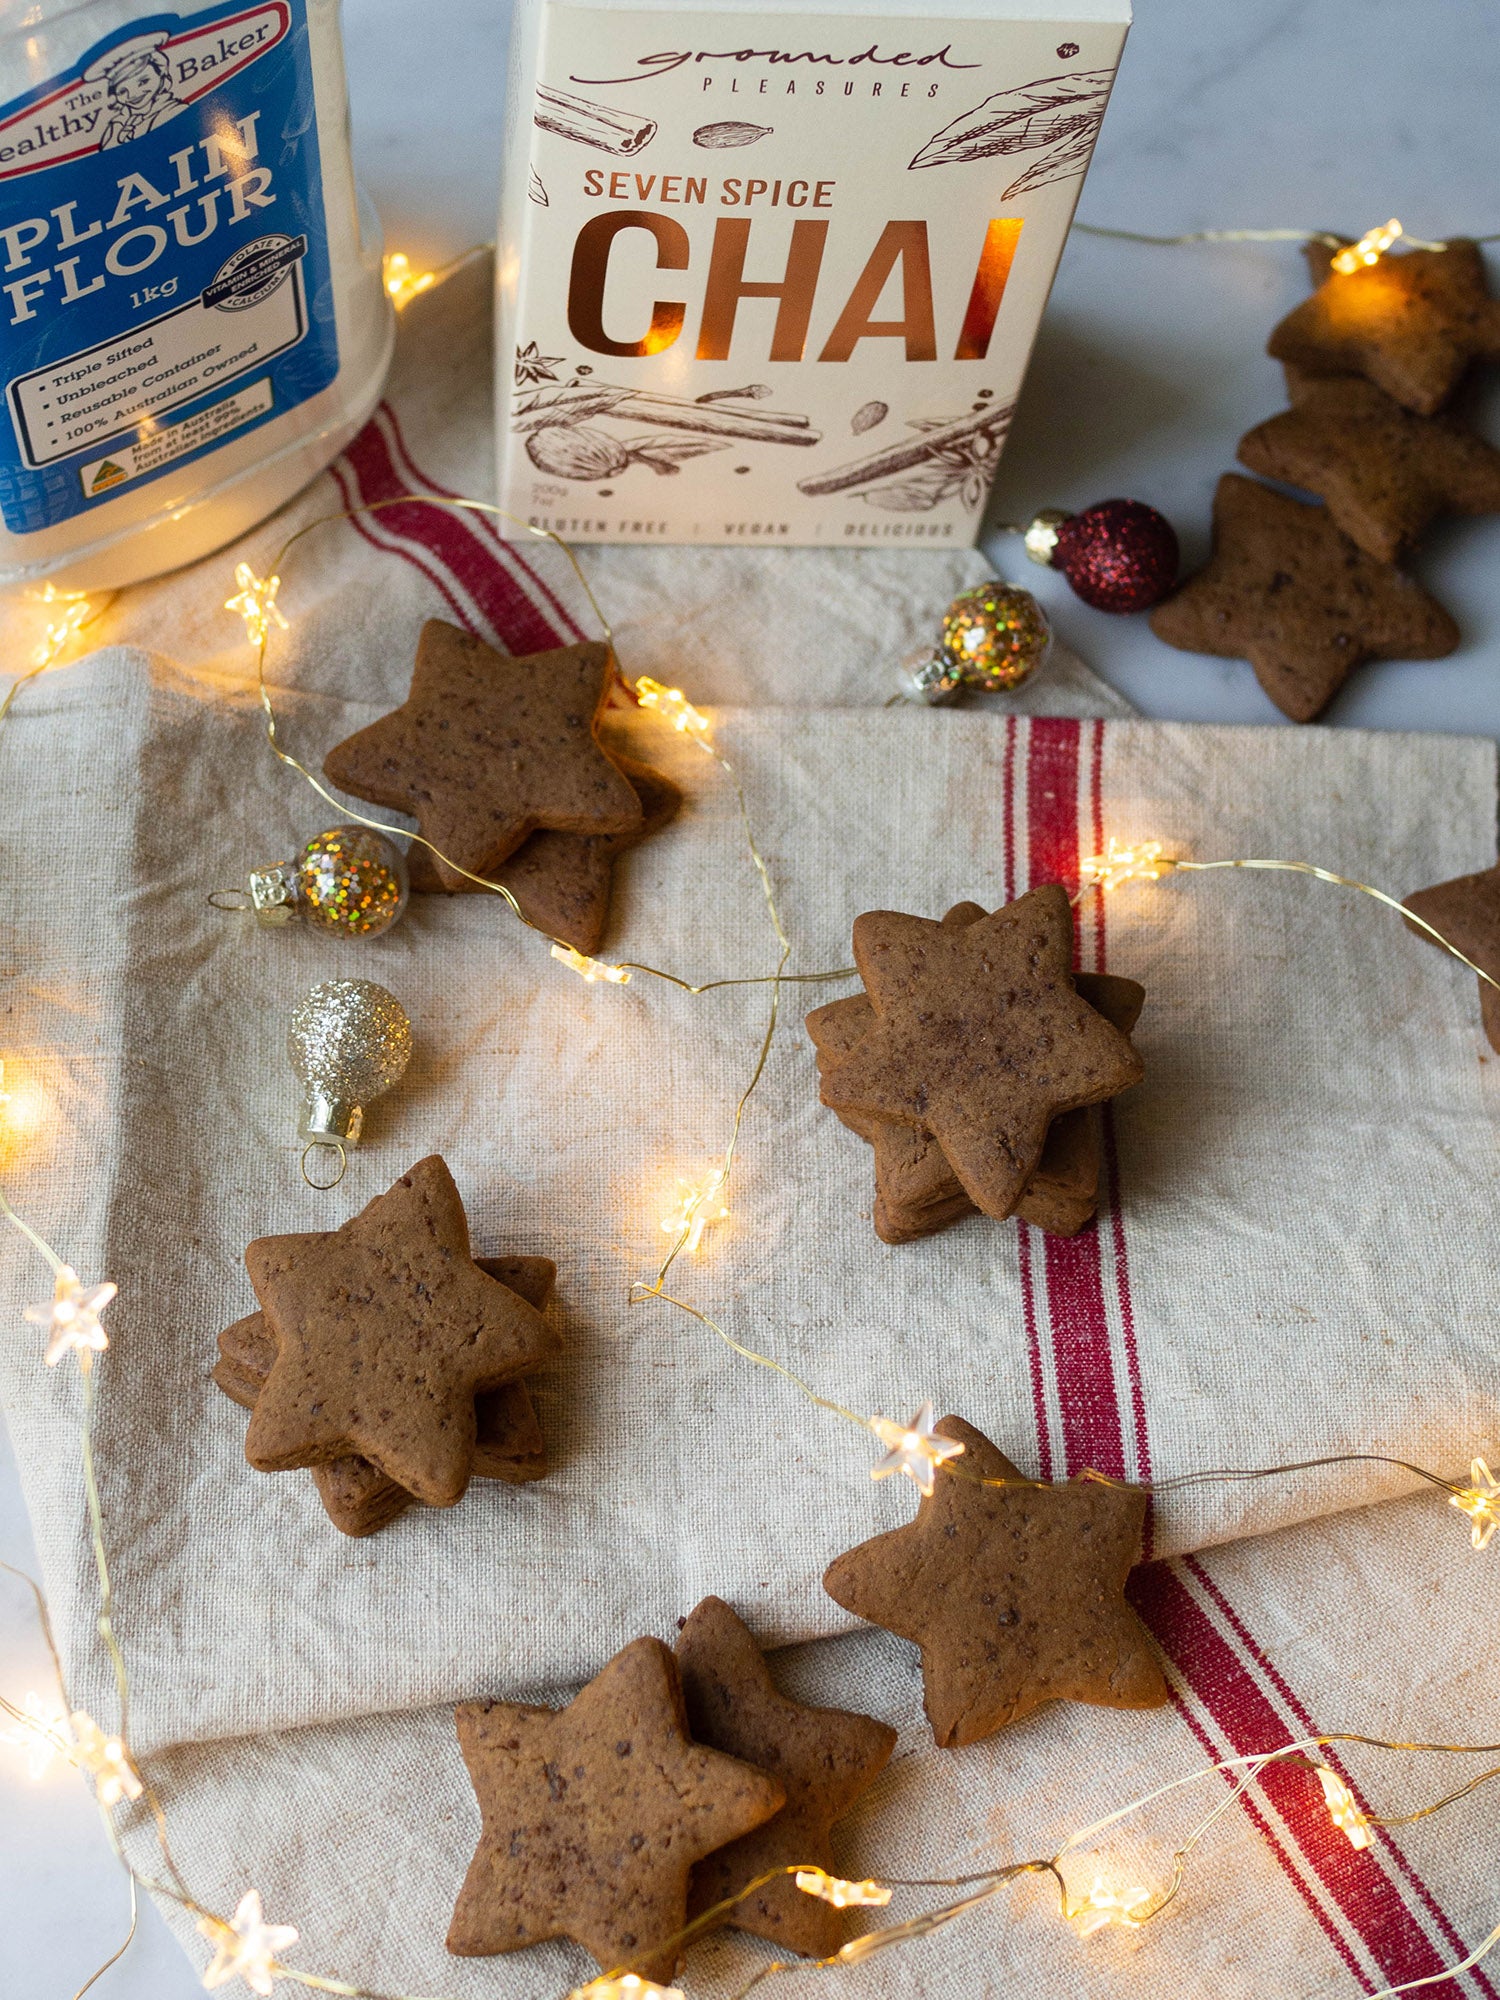 Chai Star Biscuits.